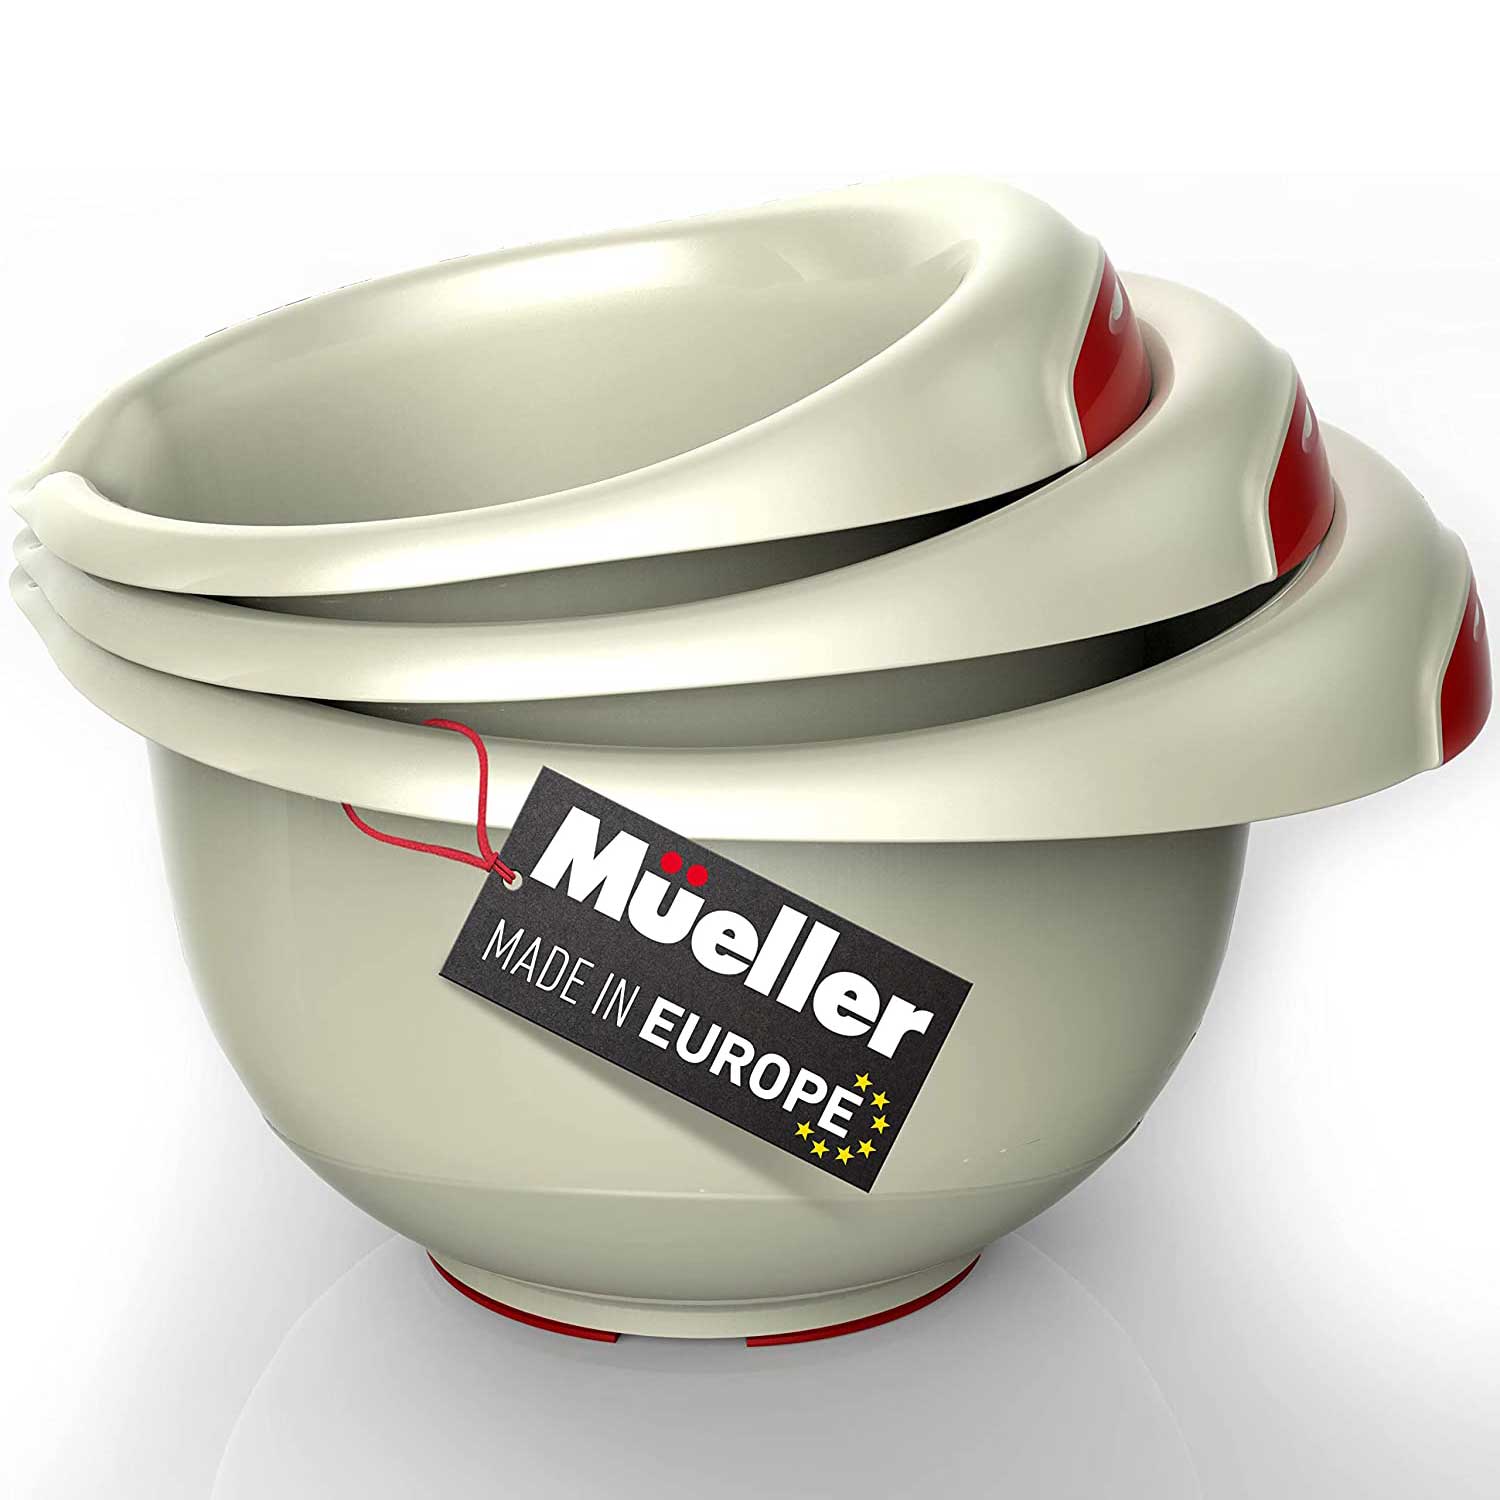 Mullearhome_Superb-Mixing-Bowl-Set-of-3-Beige